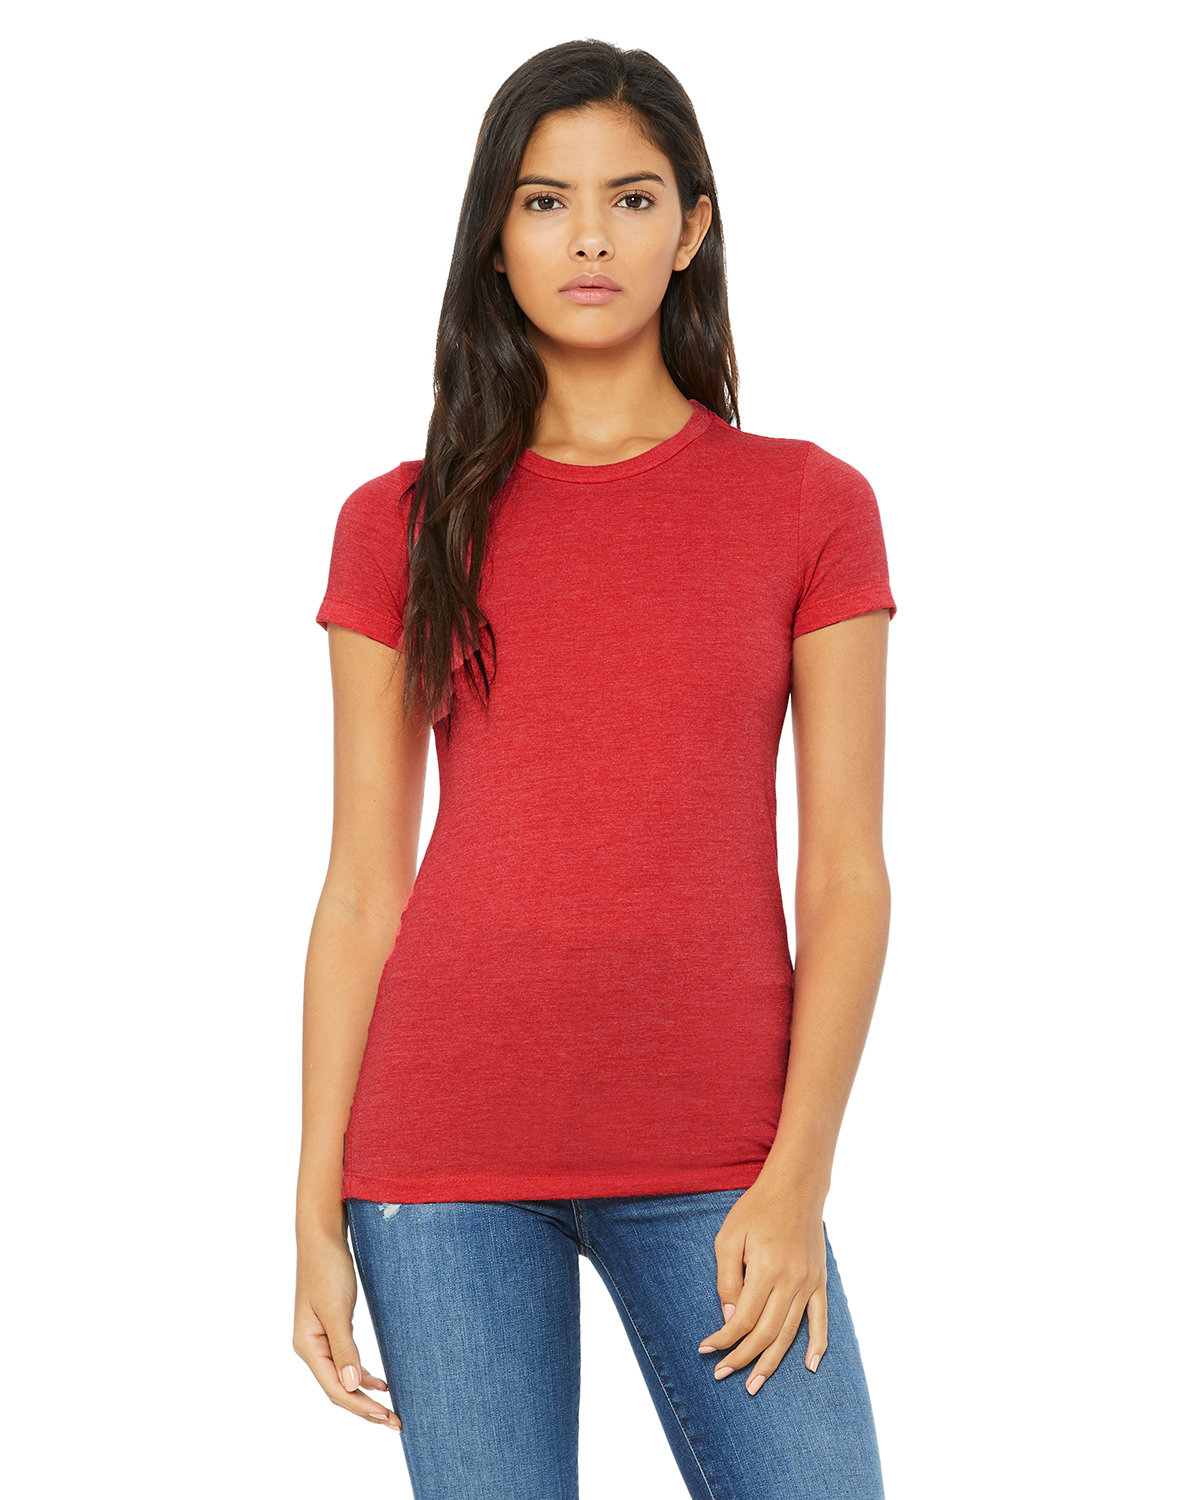 Bella + Canvas Ladies' The Favorite T-Shirt HEATHER RED 